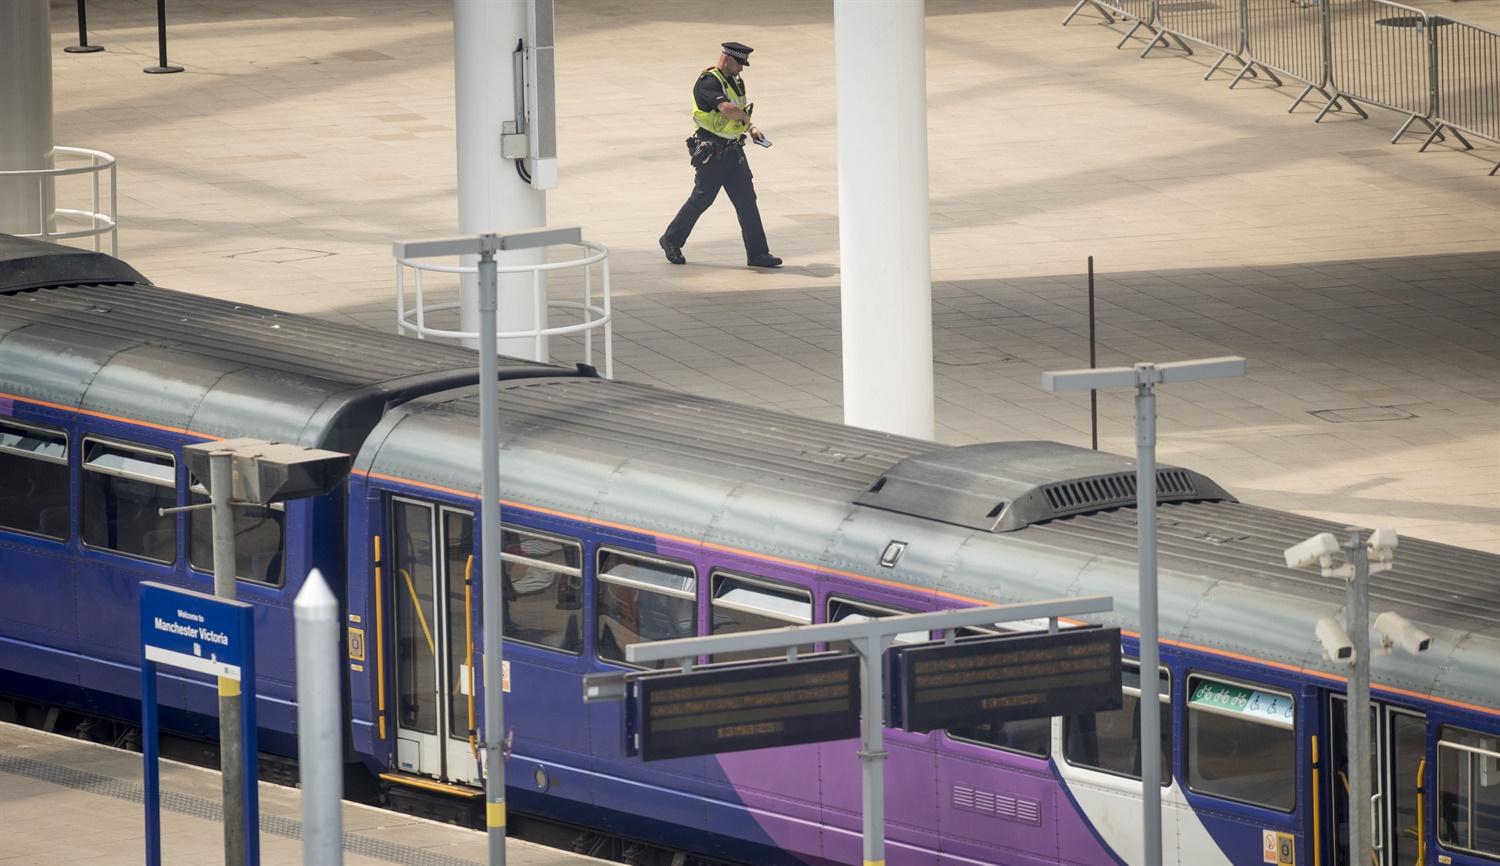 BTP steps up officer numbers at stations as terrorist threat level raised